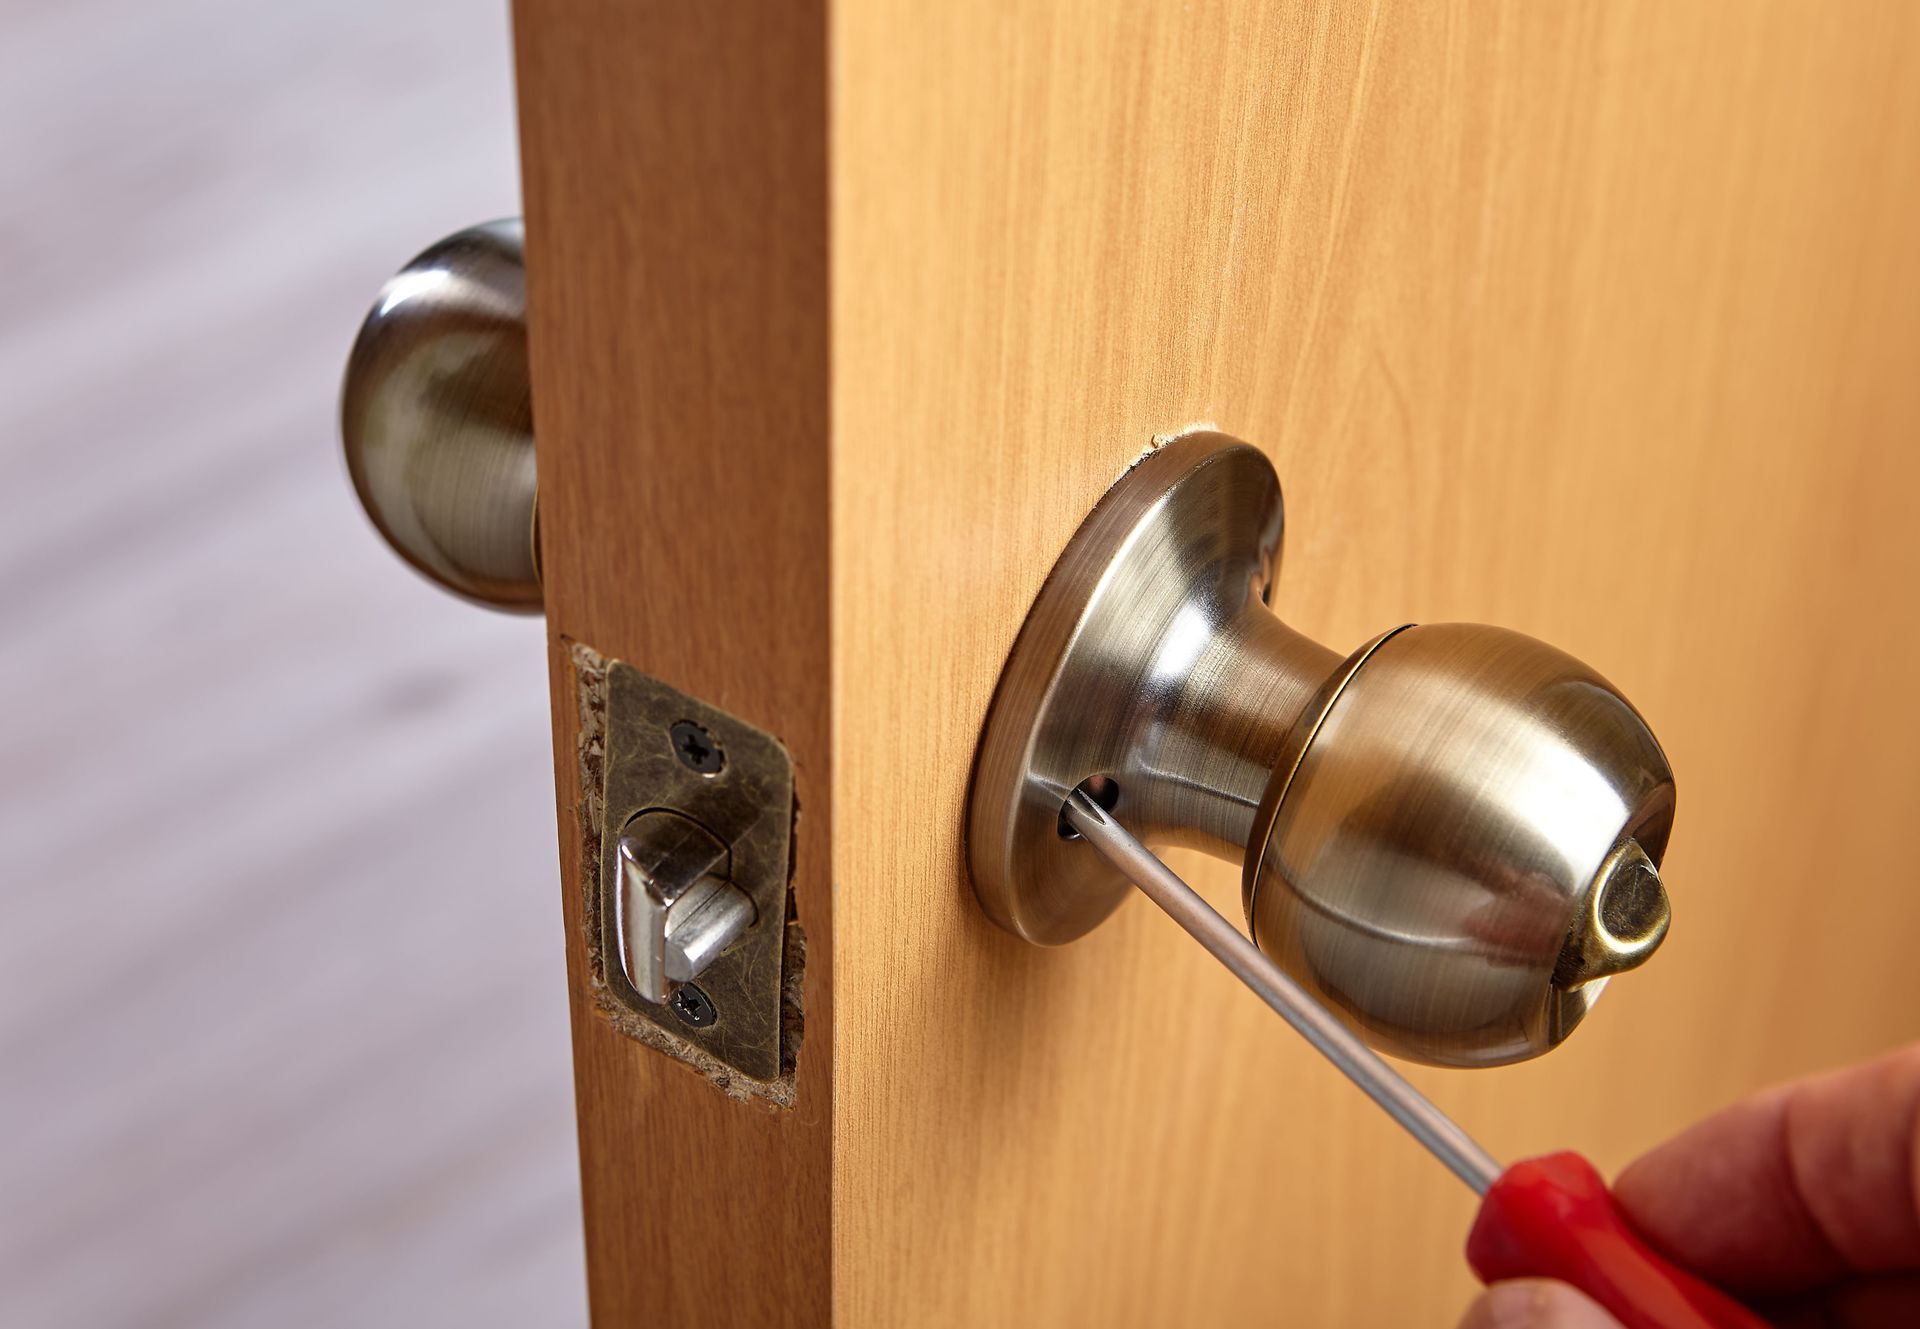 A person is fixing a door knob with a screwdriver.